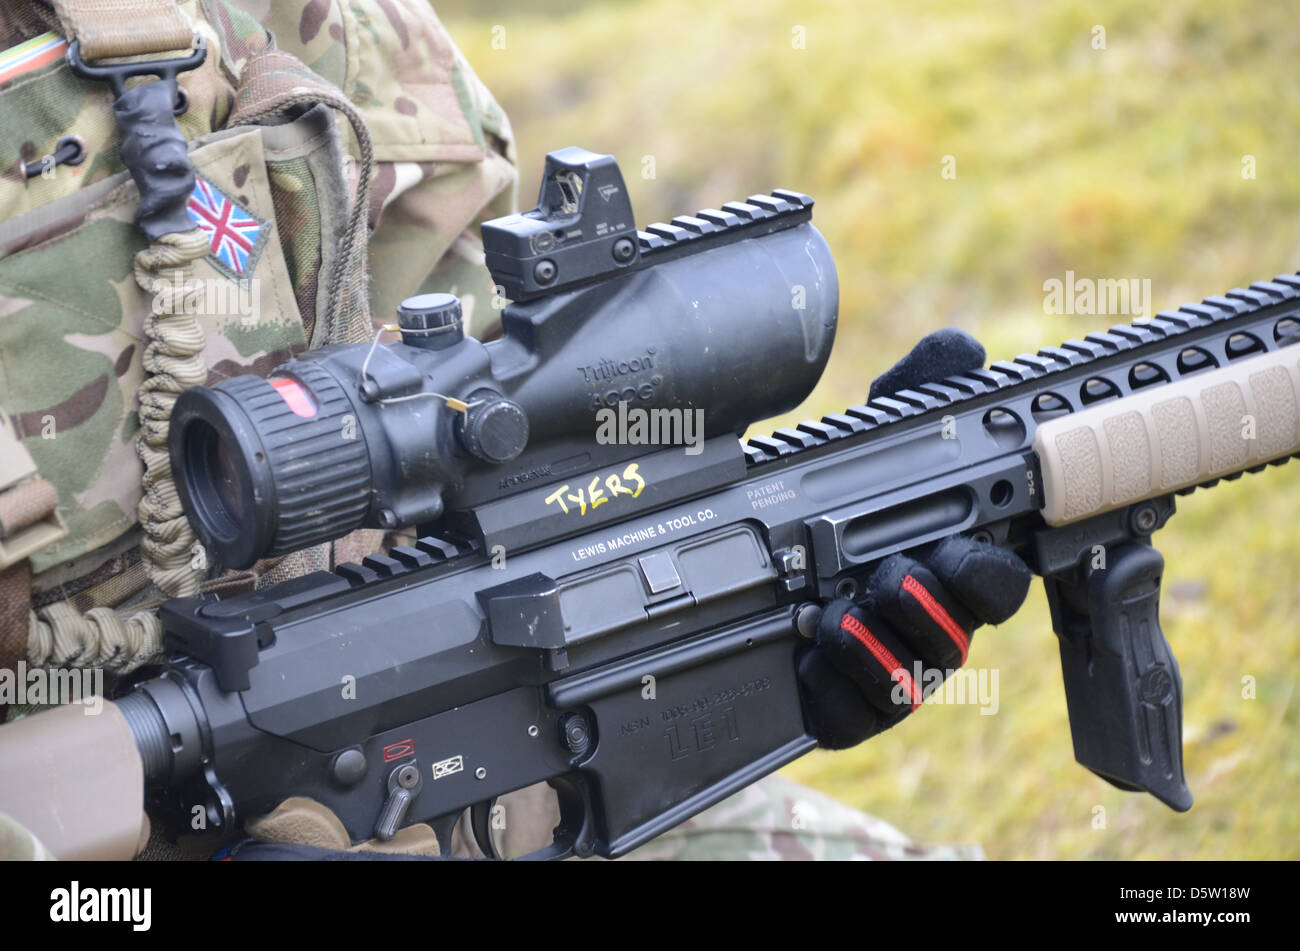 sniper,British, army, rifle, l96 sniper rifle, sharp shoot.  L129A1 Sharpshooter / Sniper rifle, as issued to British army, with Stock Photo